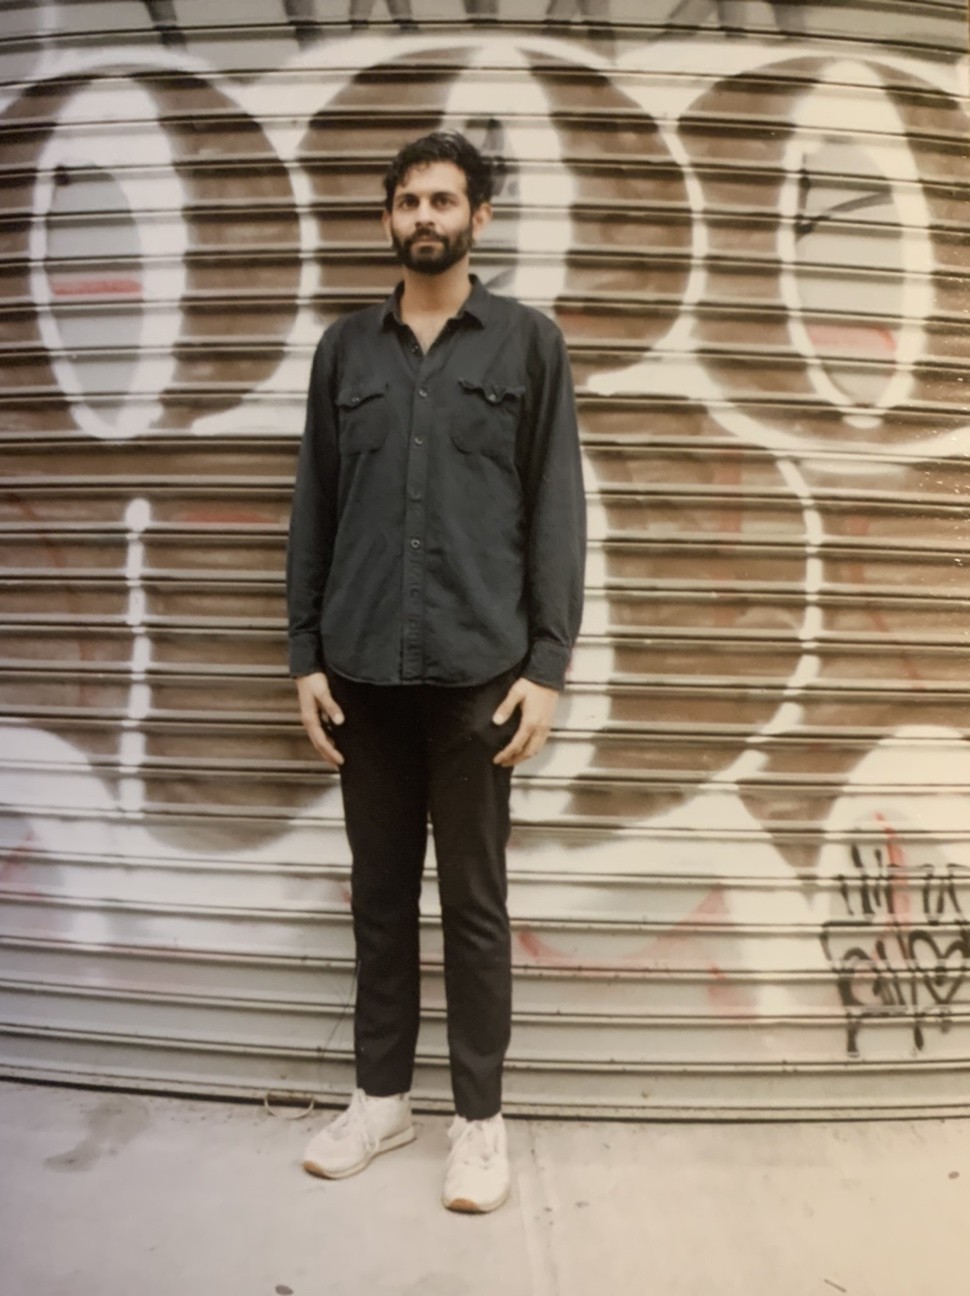 Shiv stands in front of a corrugated metal gate with graffiti on it, wearing all black with white shoes.